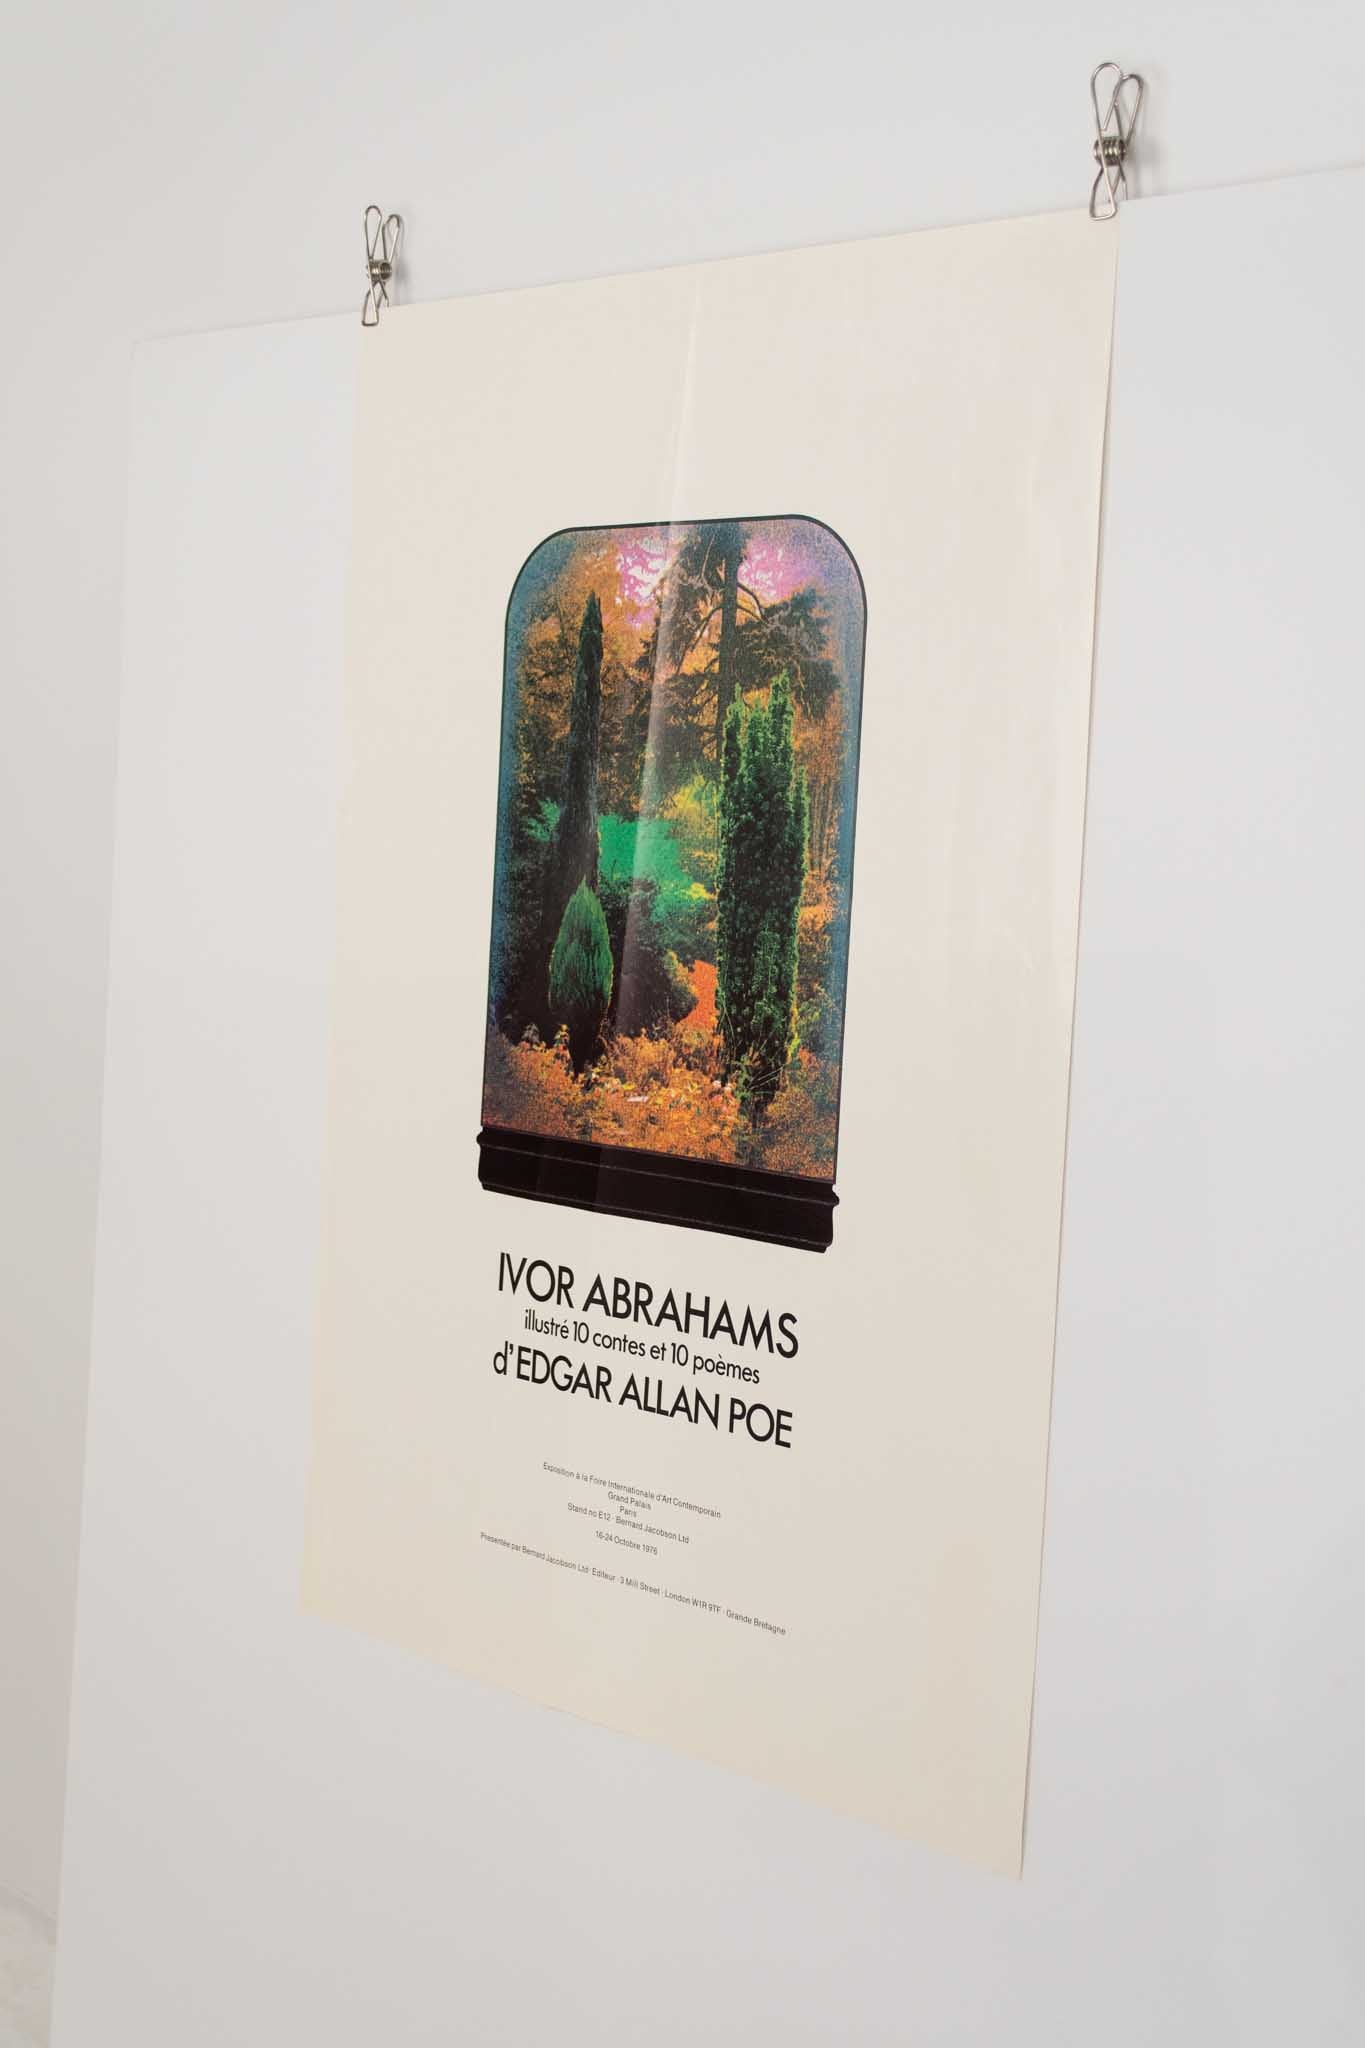 Ivor Abrahams "Illustrates 10 Stories and 10 Poems by Edgar Allen Poe" Print